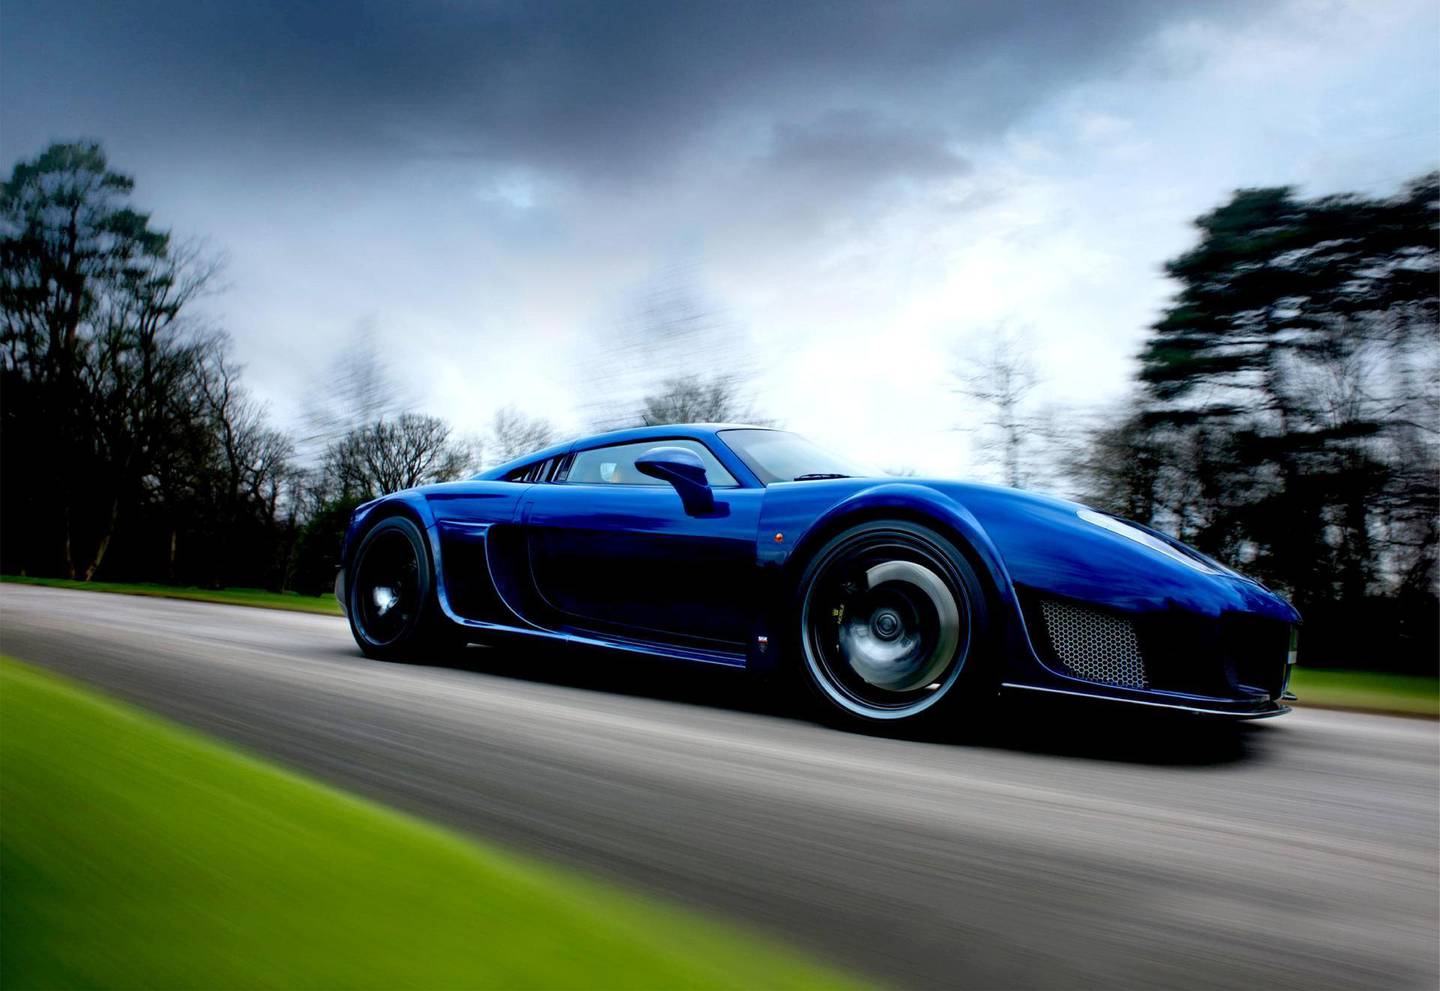 It doesn’t get more back-to-basics than the Noble M600.